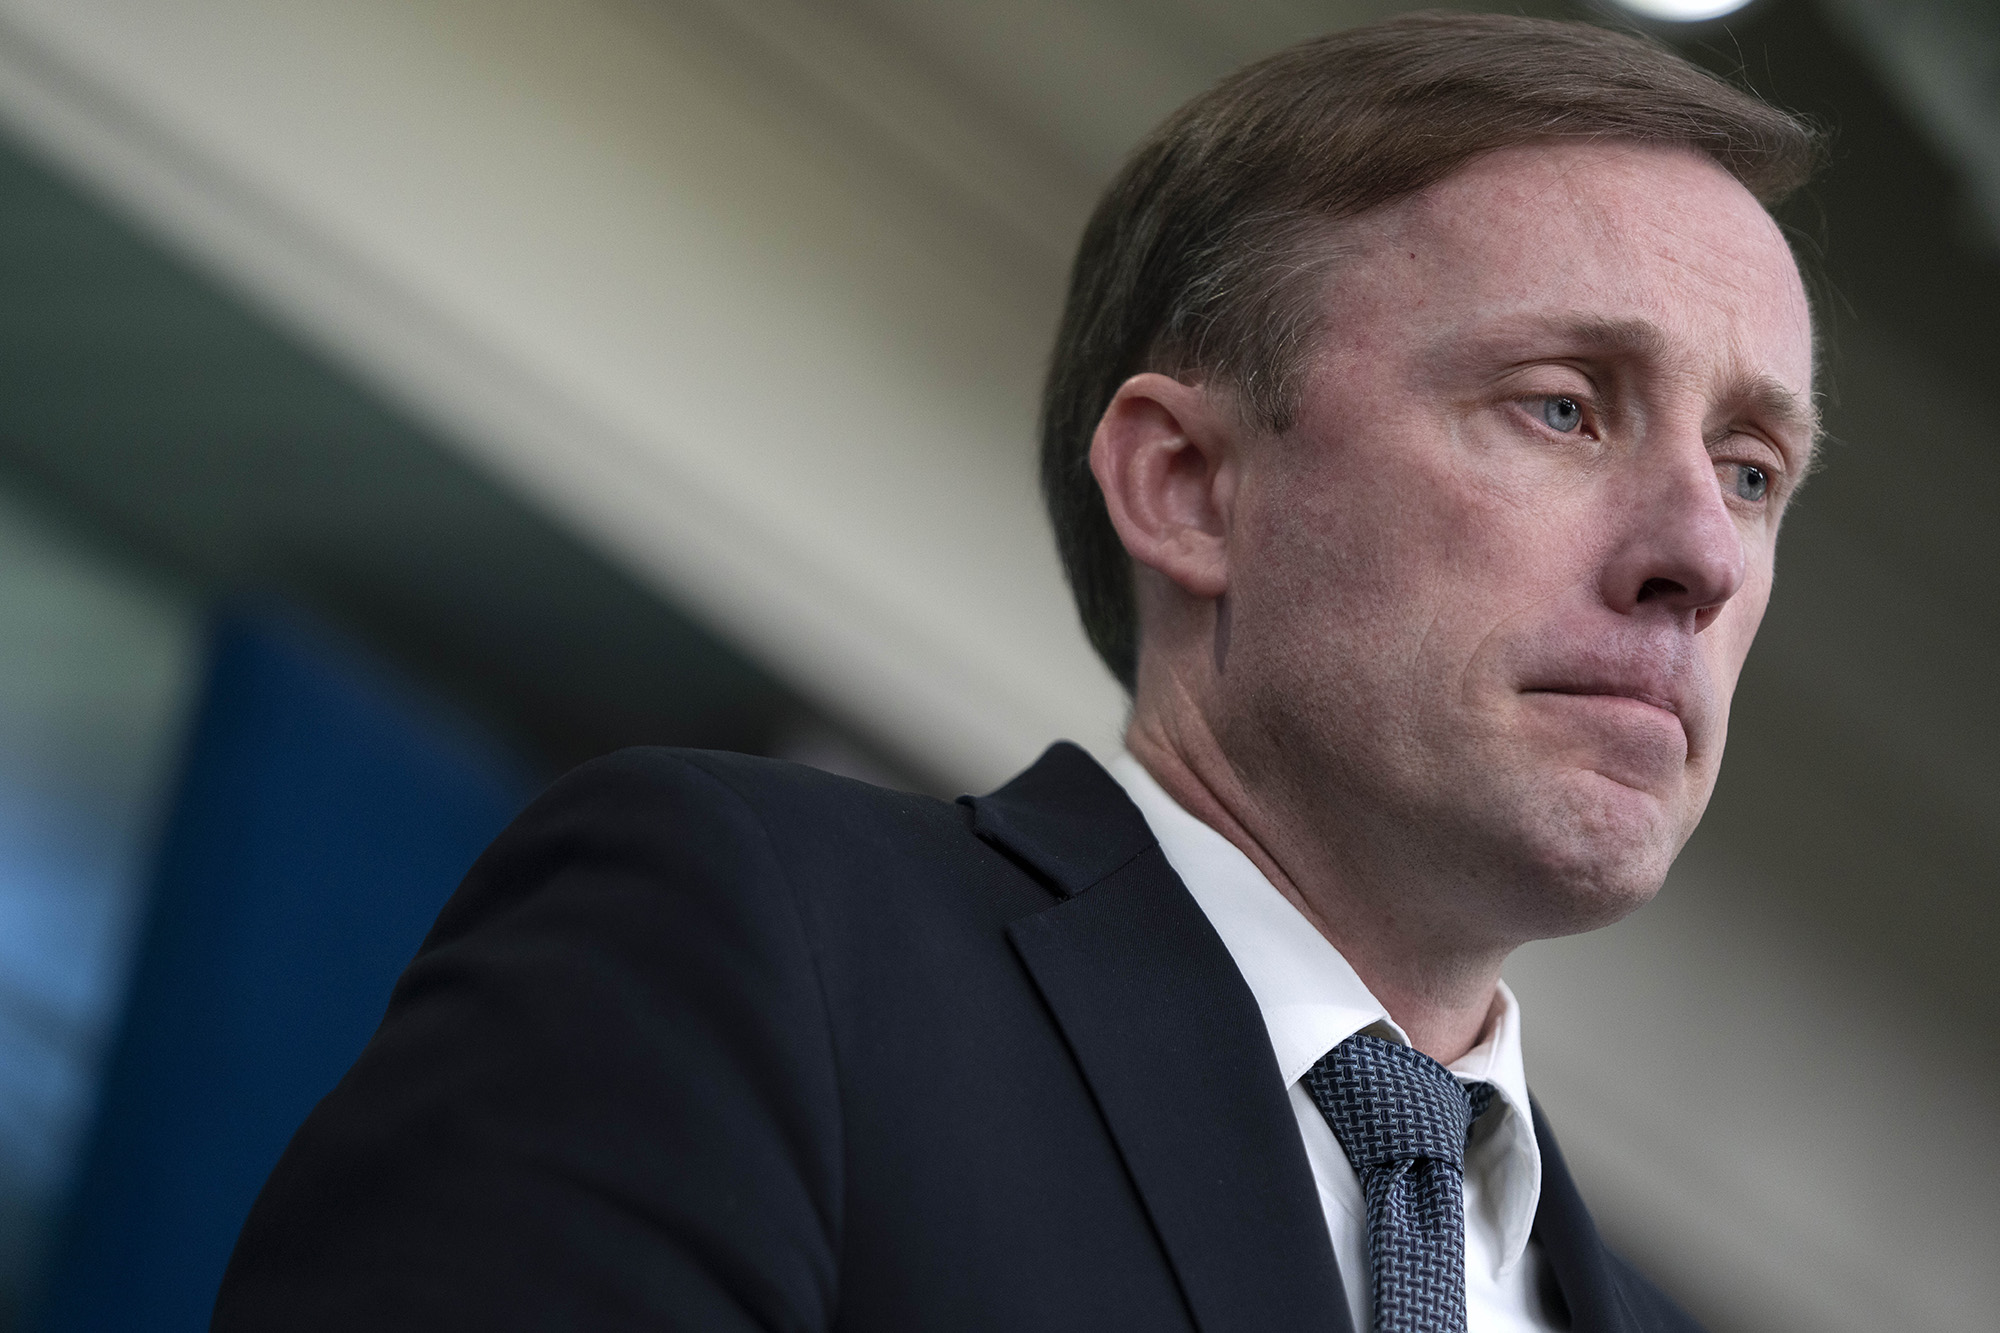 National Security Advisor Jake Sullivan speaks during a press briefing at the White House in Washington, D.C, on February 14.